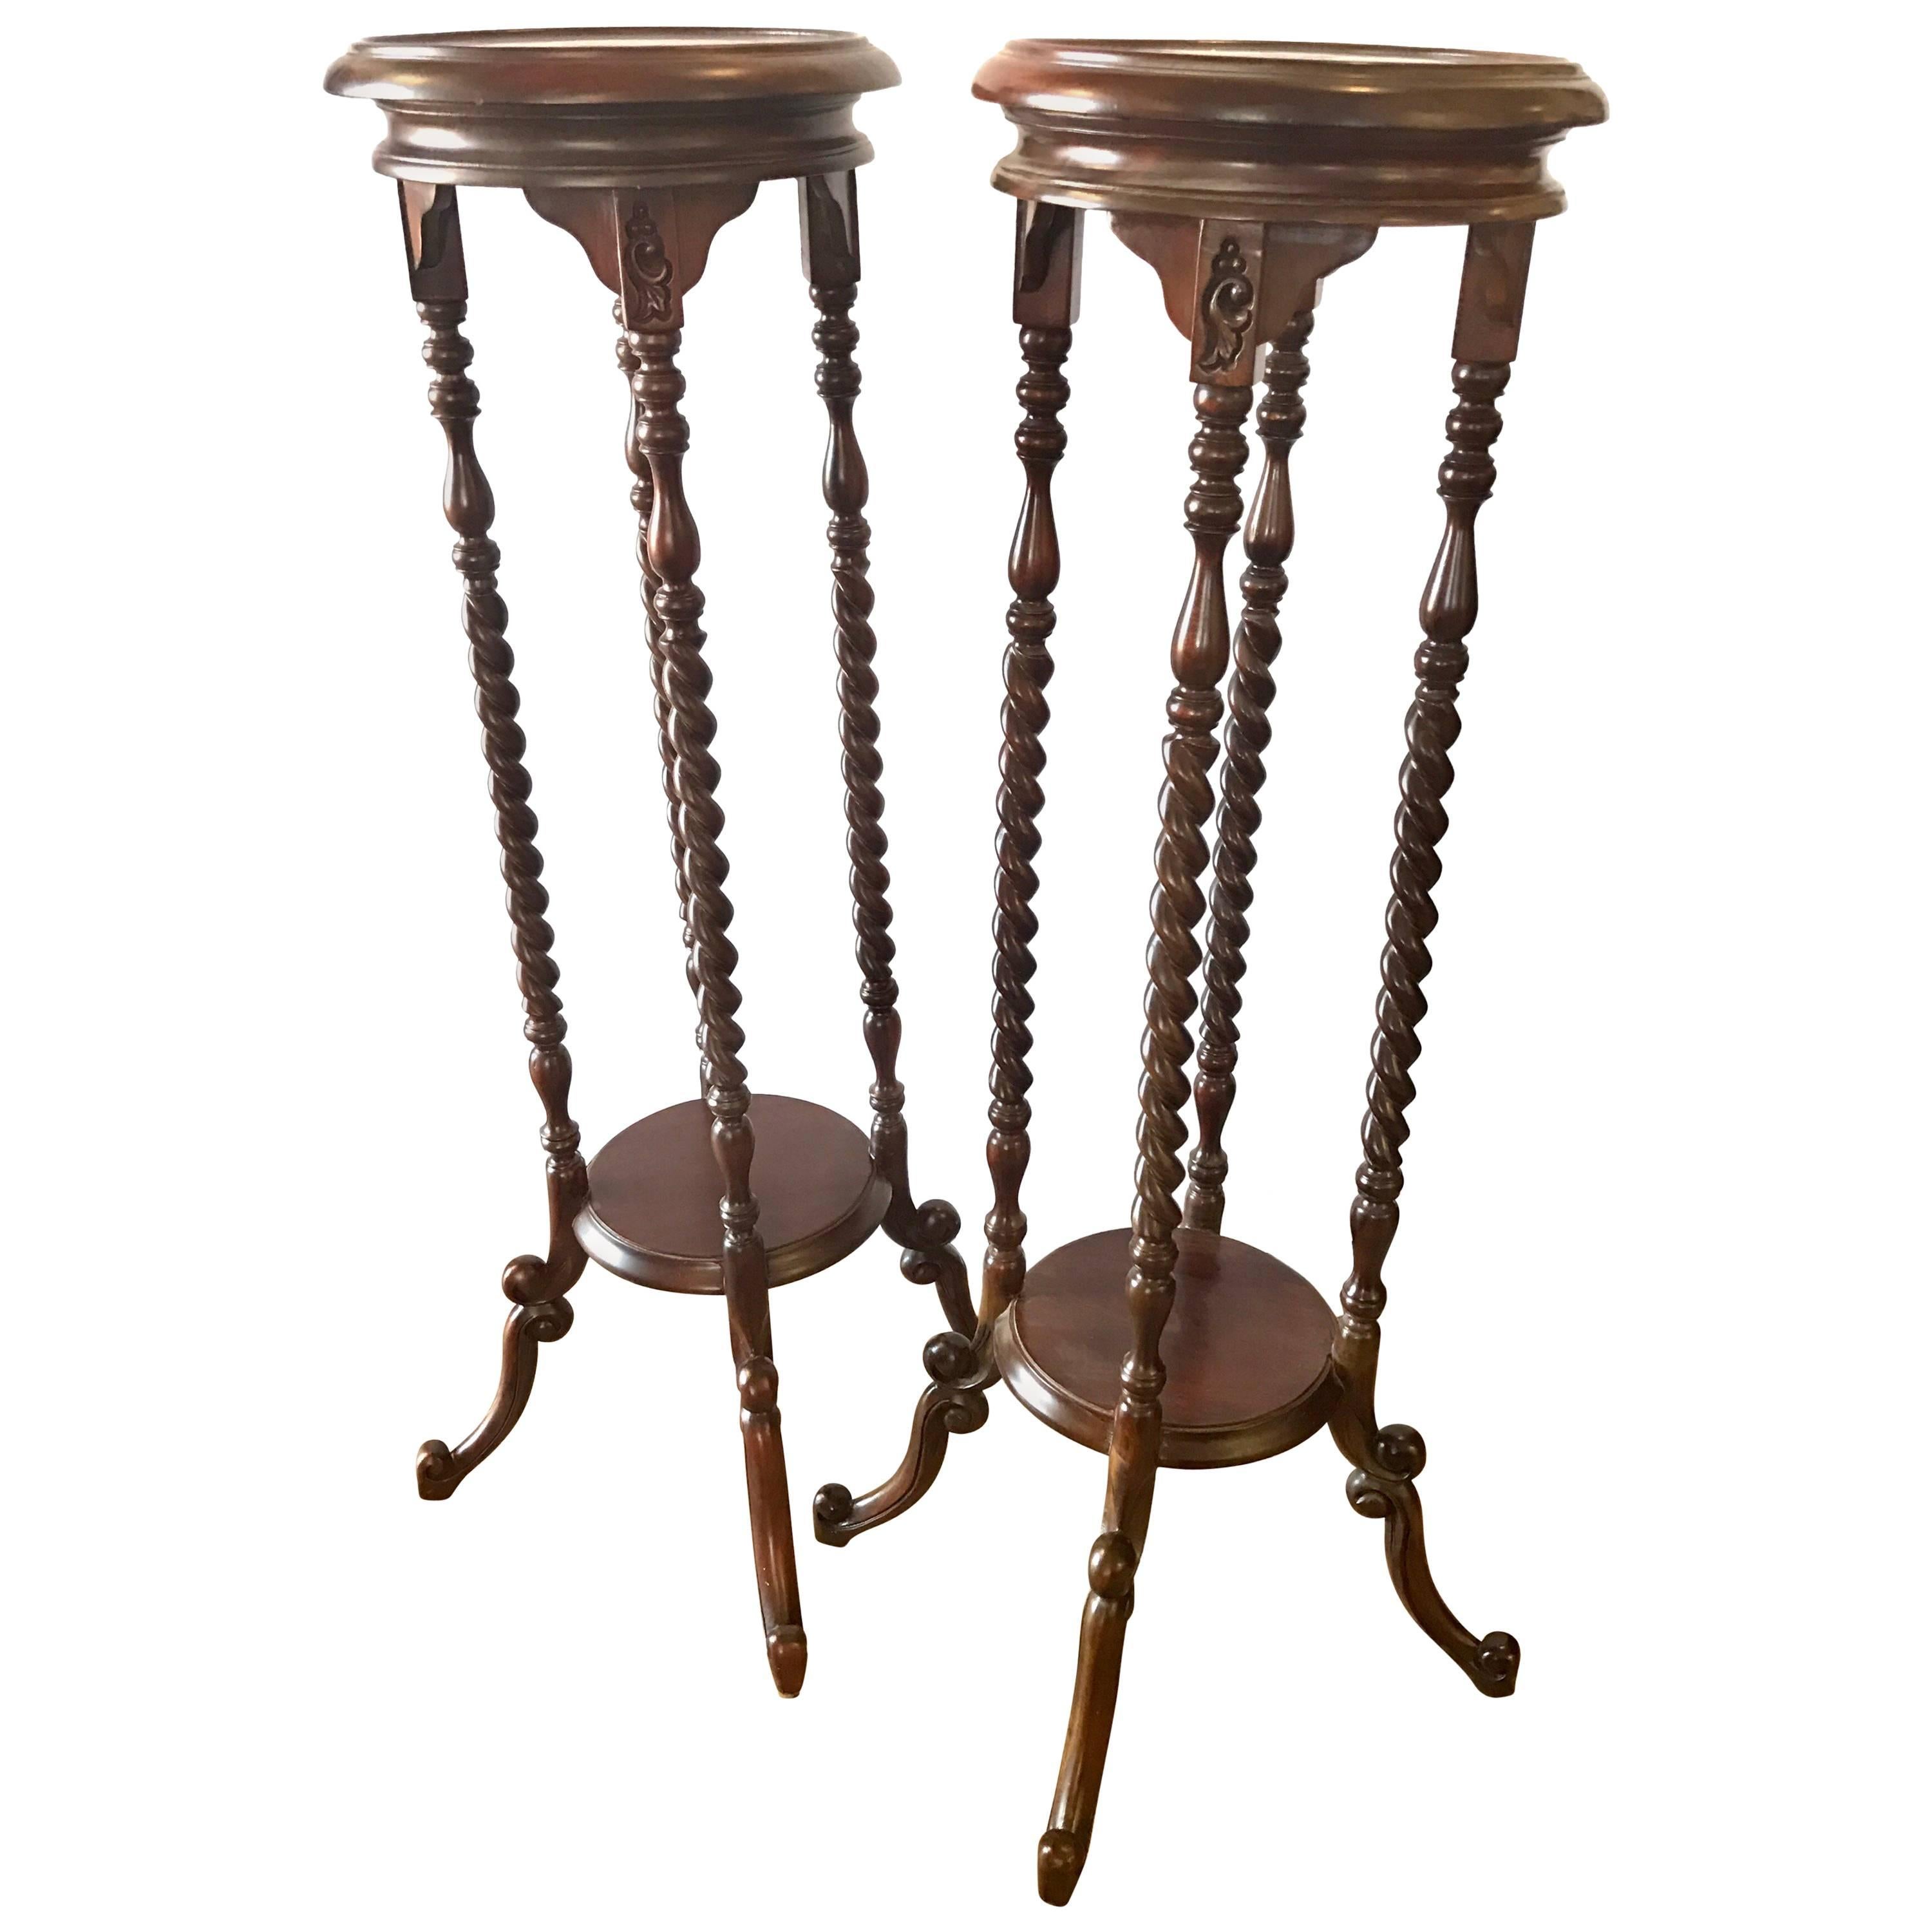 Pair of Carved Mahogany Plant Pedestal Stands Display Columns Torchieres